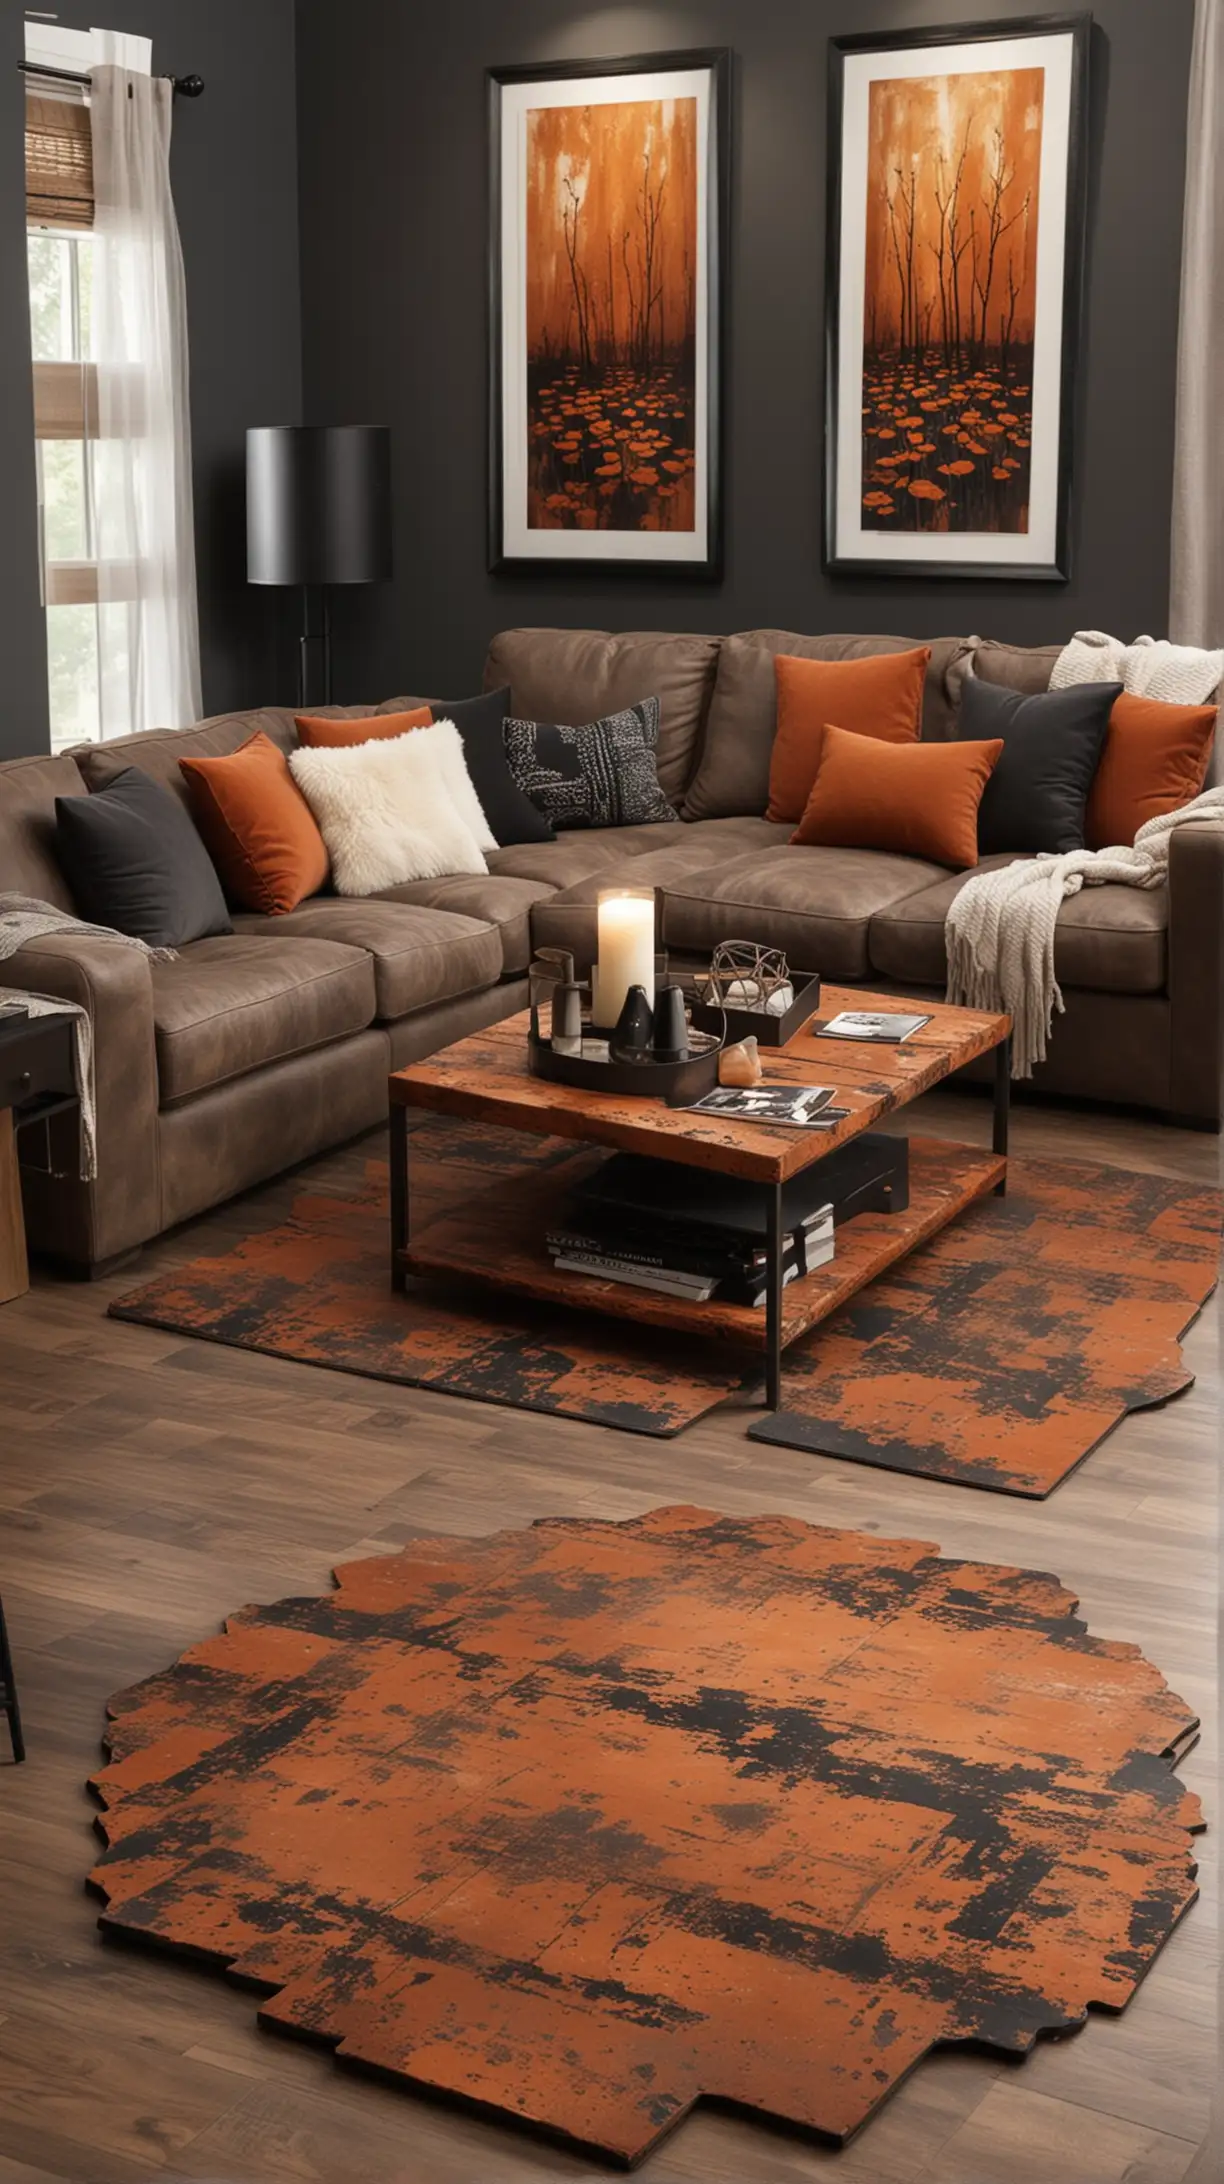 create me the image of black and rust theme living room idea. Make sure to add the sitting or sofa in the frame. Furthermore everything in the idea should be in the frame of image like. Here's the design you have to create for me [Black and Rust Coasters

Using coasters in the room's theme colors is a thoughtful touch that adds to the decor while being practically useful. It’s those little details that pull a room together.]